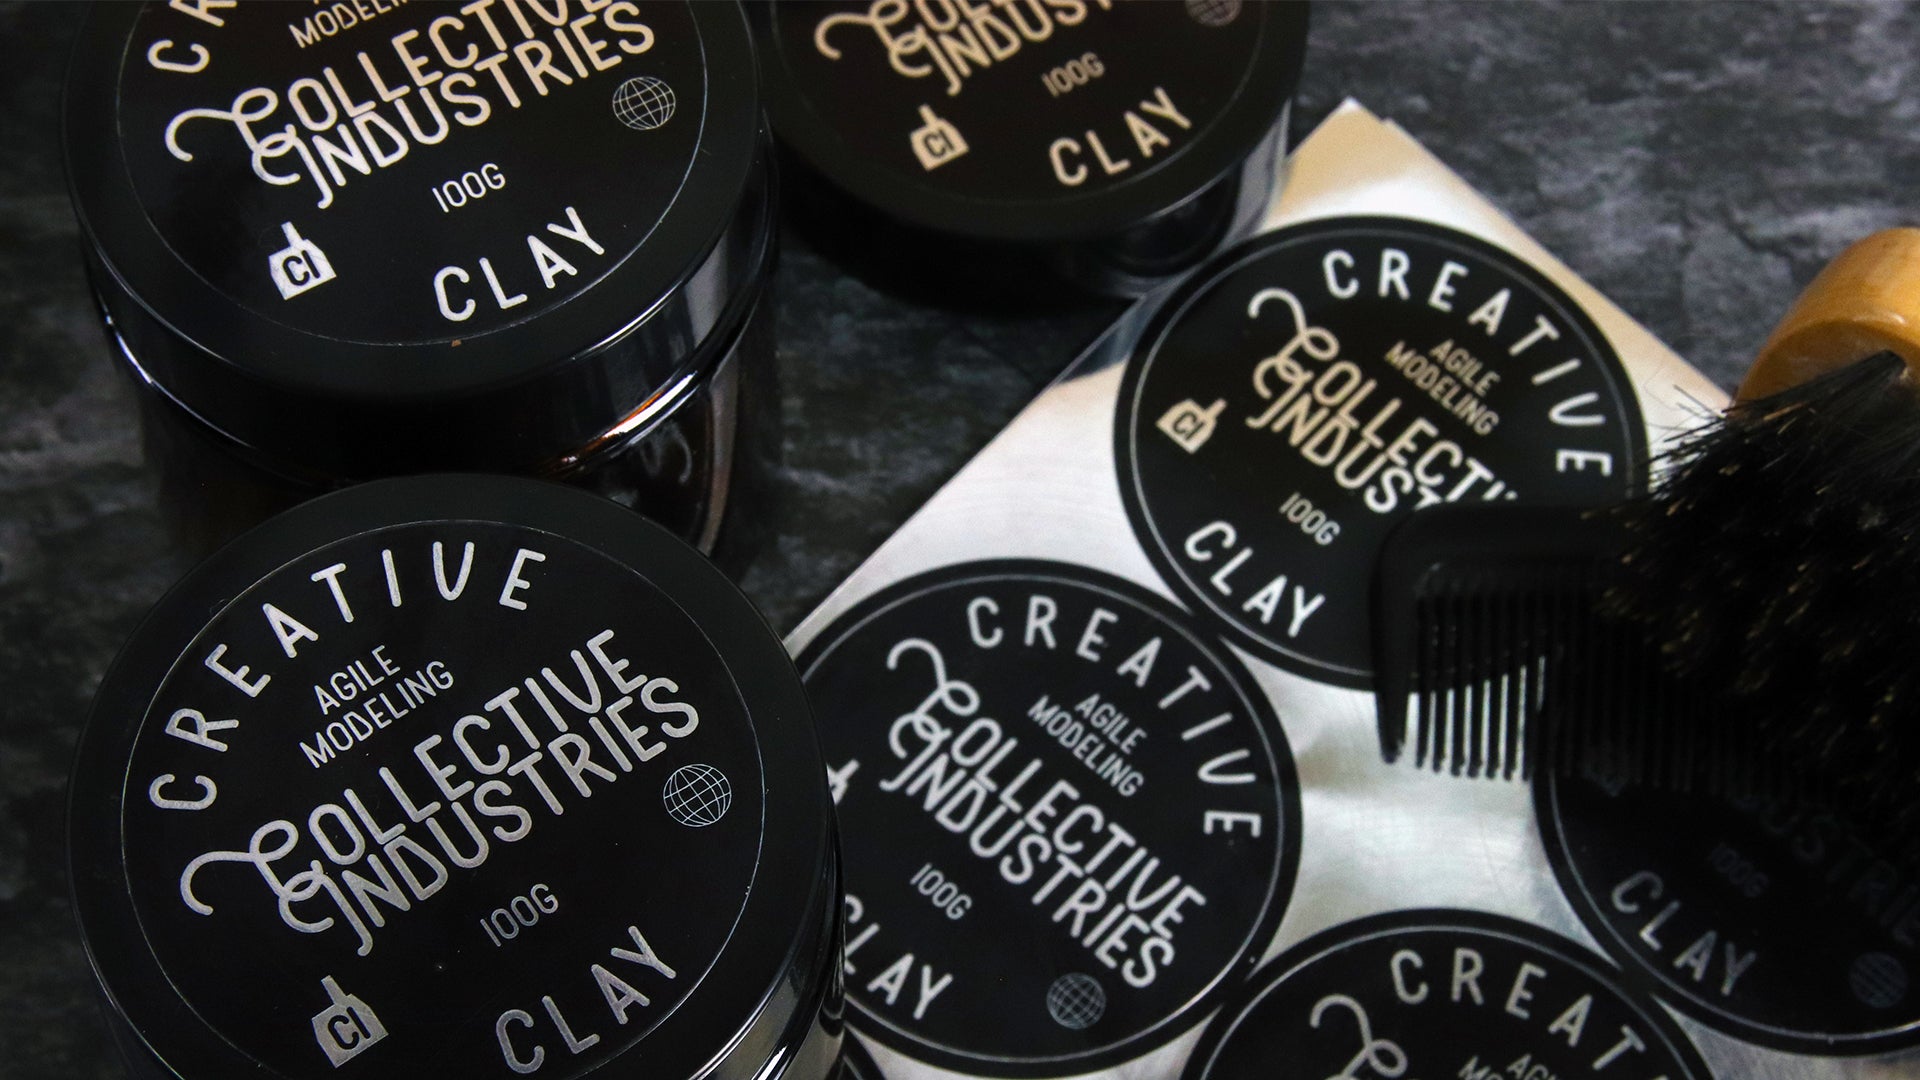 Circle mirror silver branding labels applied to black tins containing hair care next to a sheet